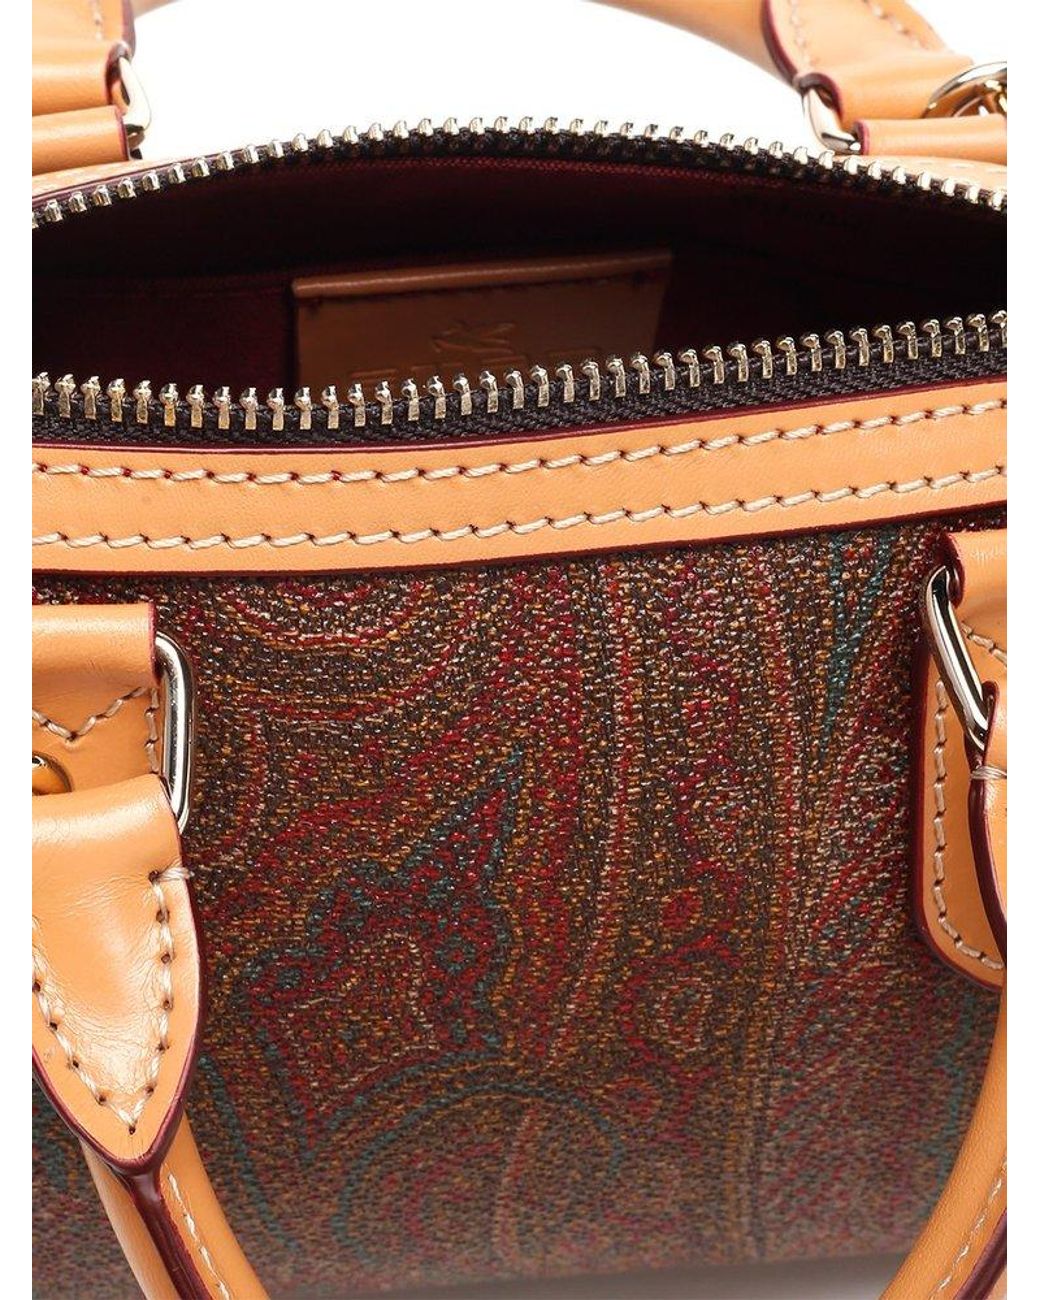 Buy ETRO / Etro ◇Mini Boston bag/Tube bag/Paisley pattern/Brown/With box  Women's fashion [Bag/Back/BAG/bag/bag] [Used] from Japan - Buy authentic  Plus exclusive items from Japan